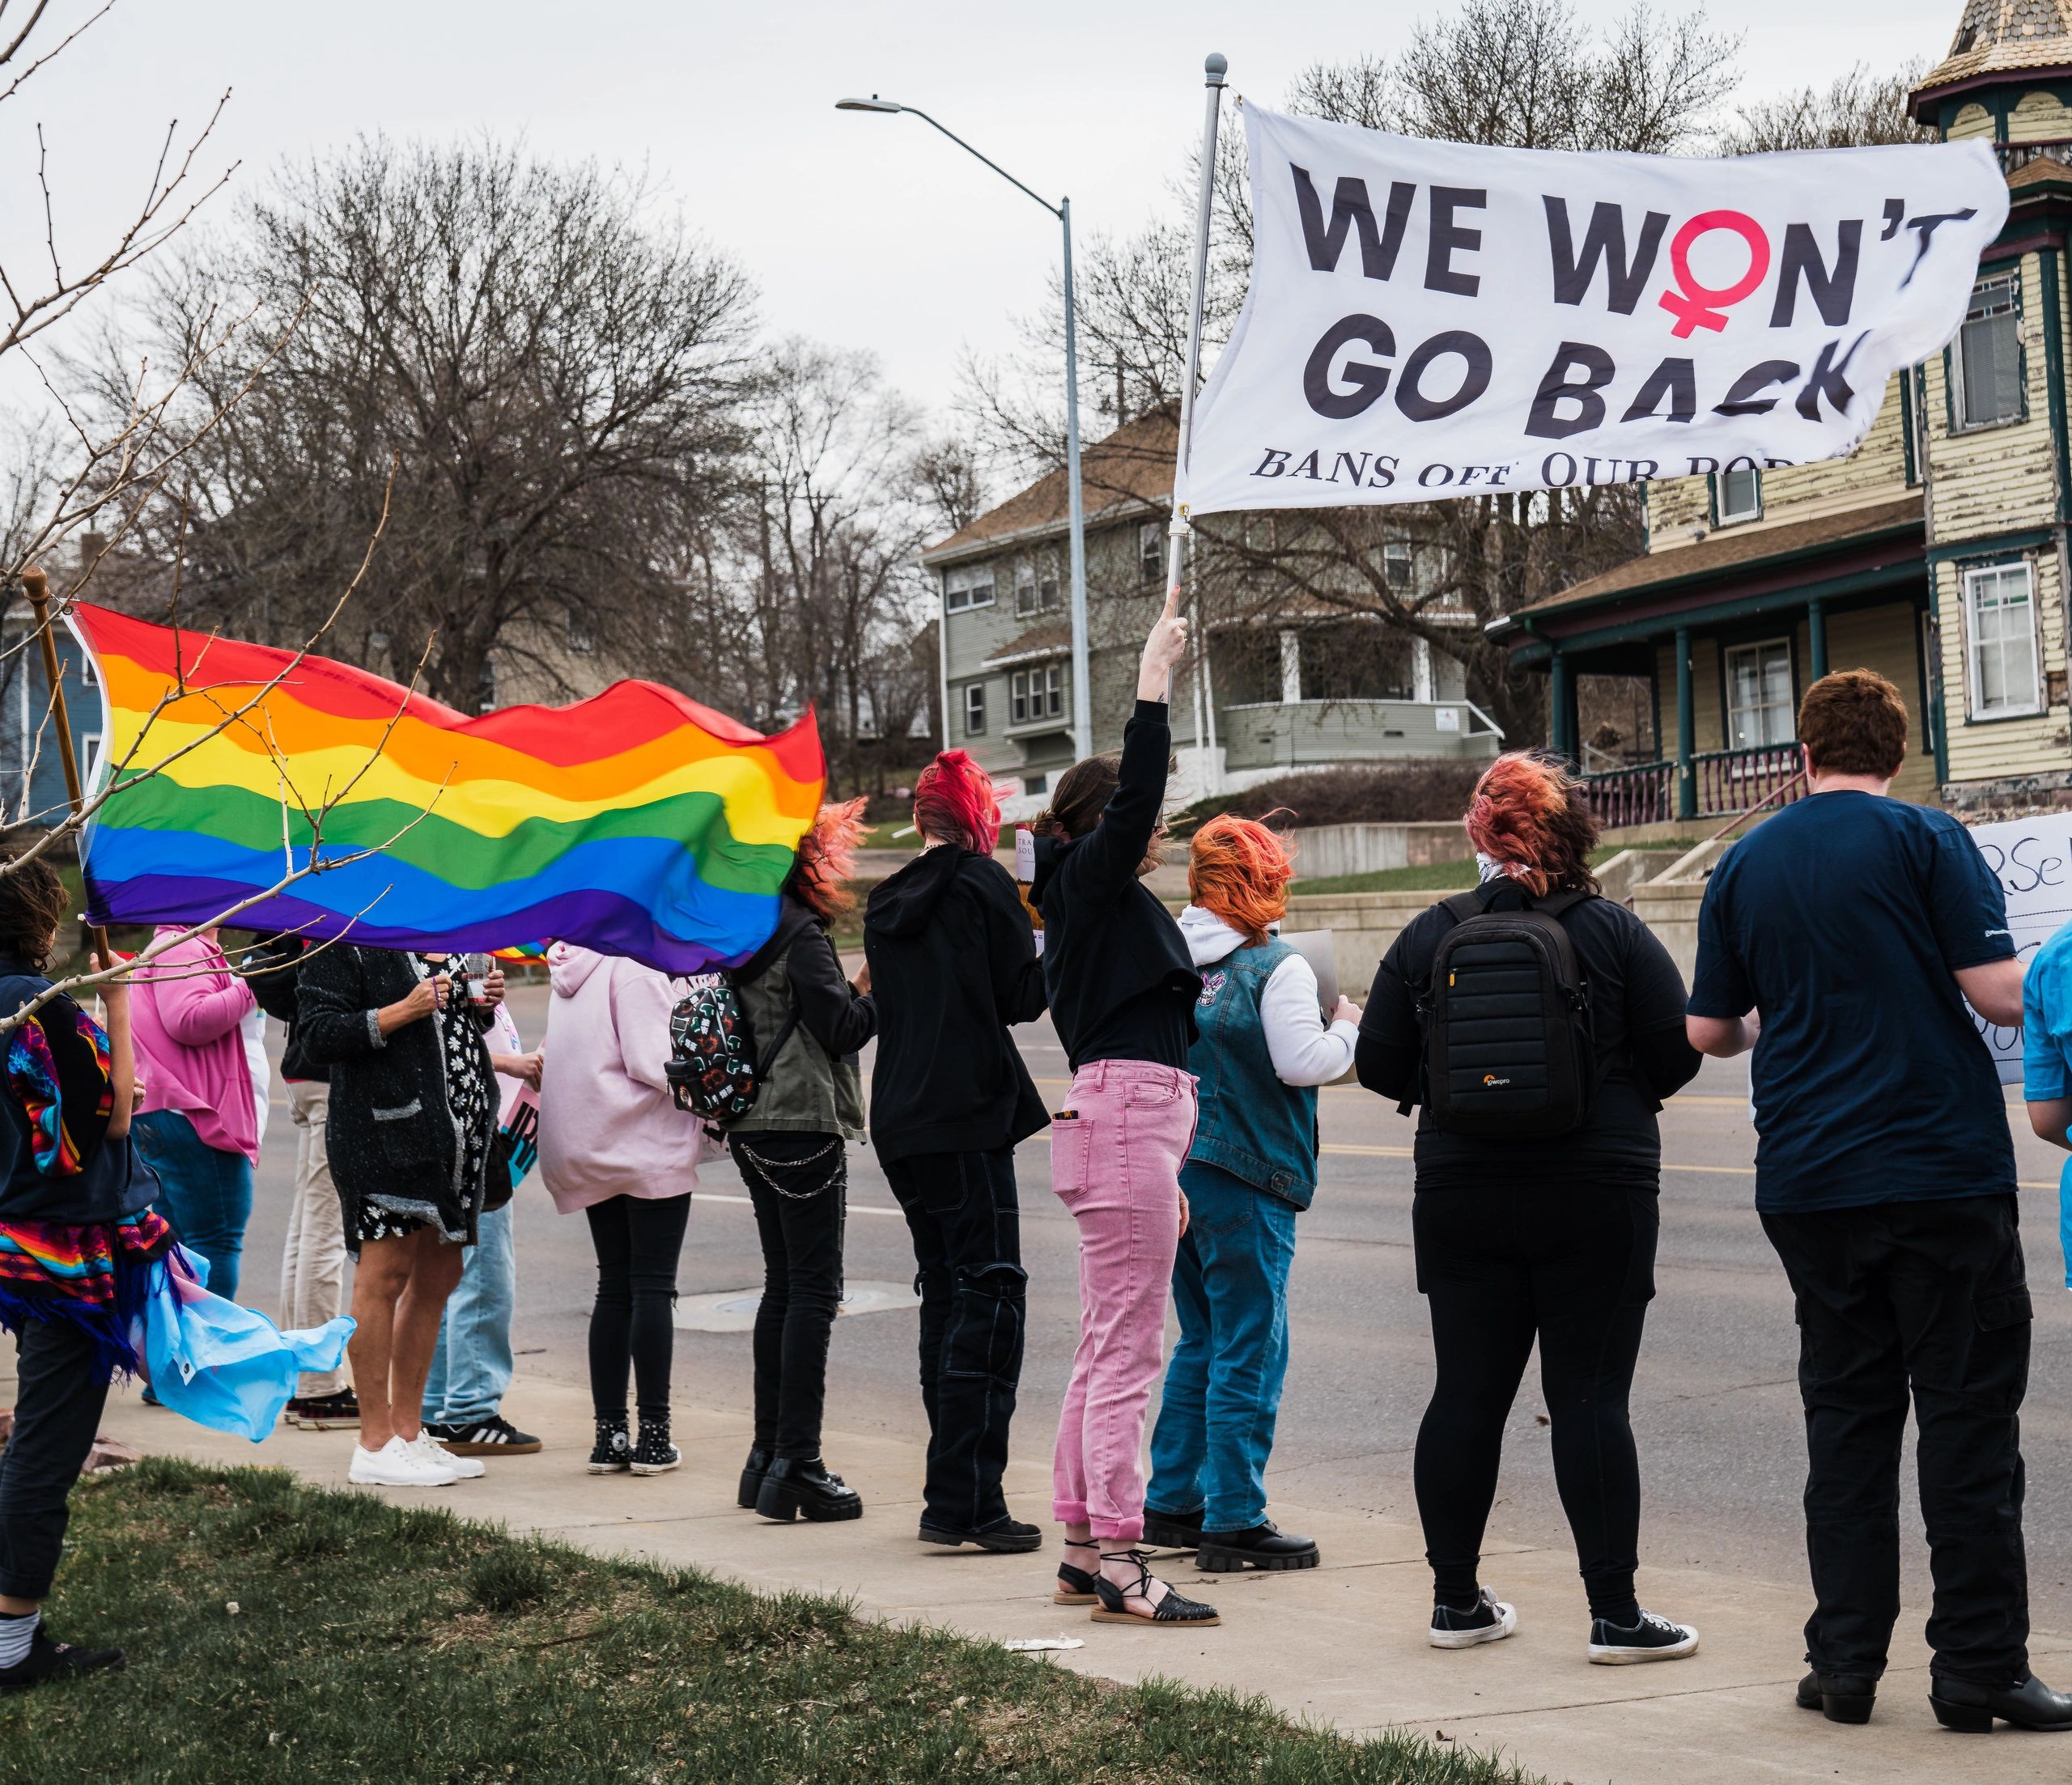 Protest with pro-choice and gay flag in Sioux Falls South Dakota; young people advocating